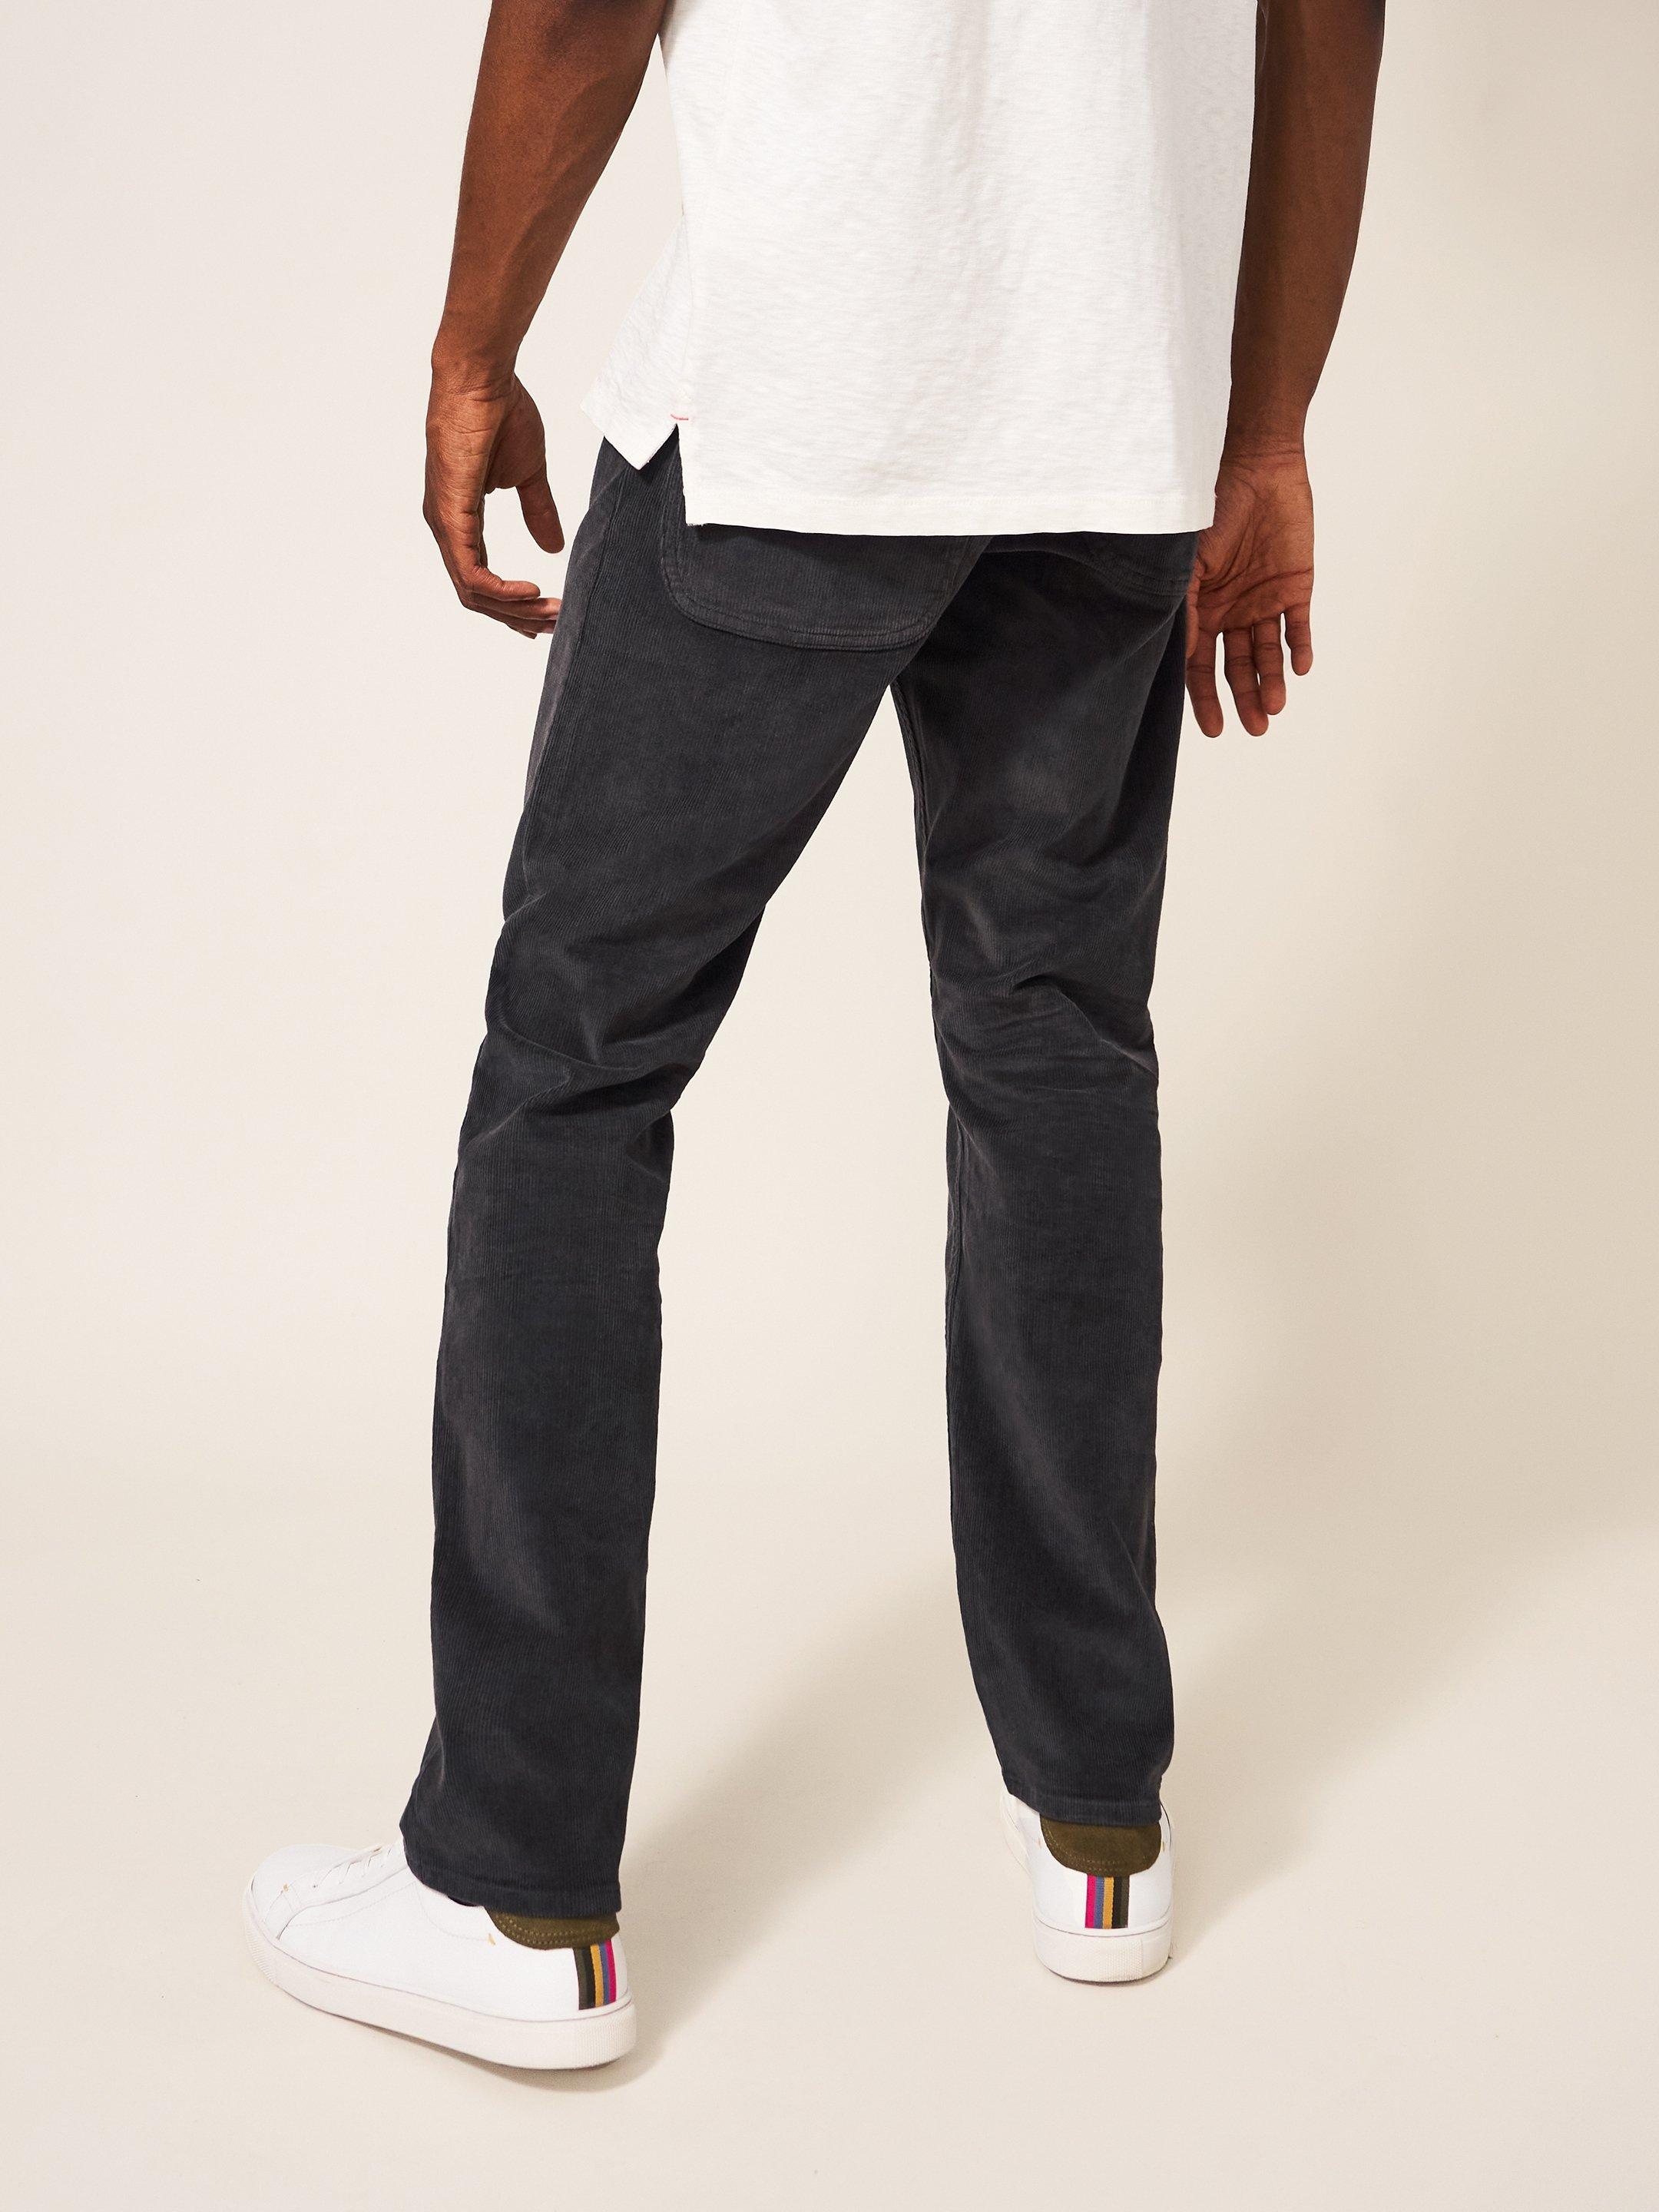 Crosby Cord Trouser in WASHED BLK - MODEL BACK